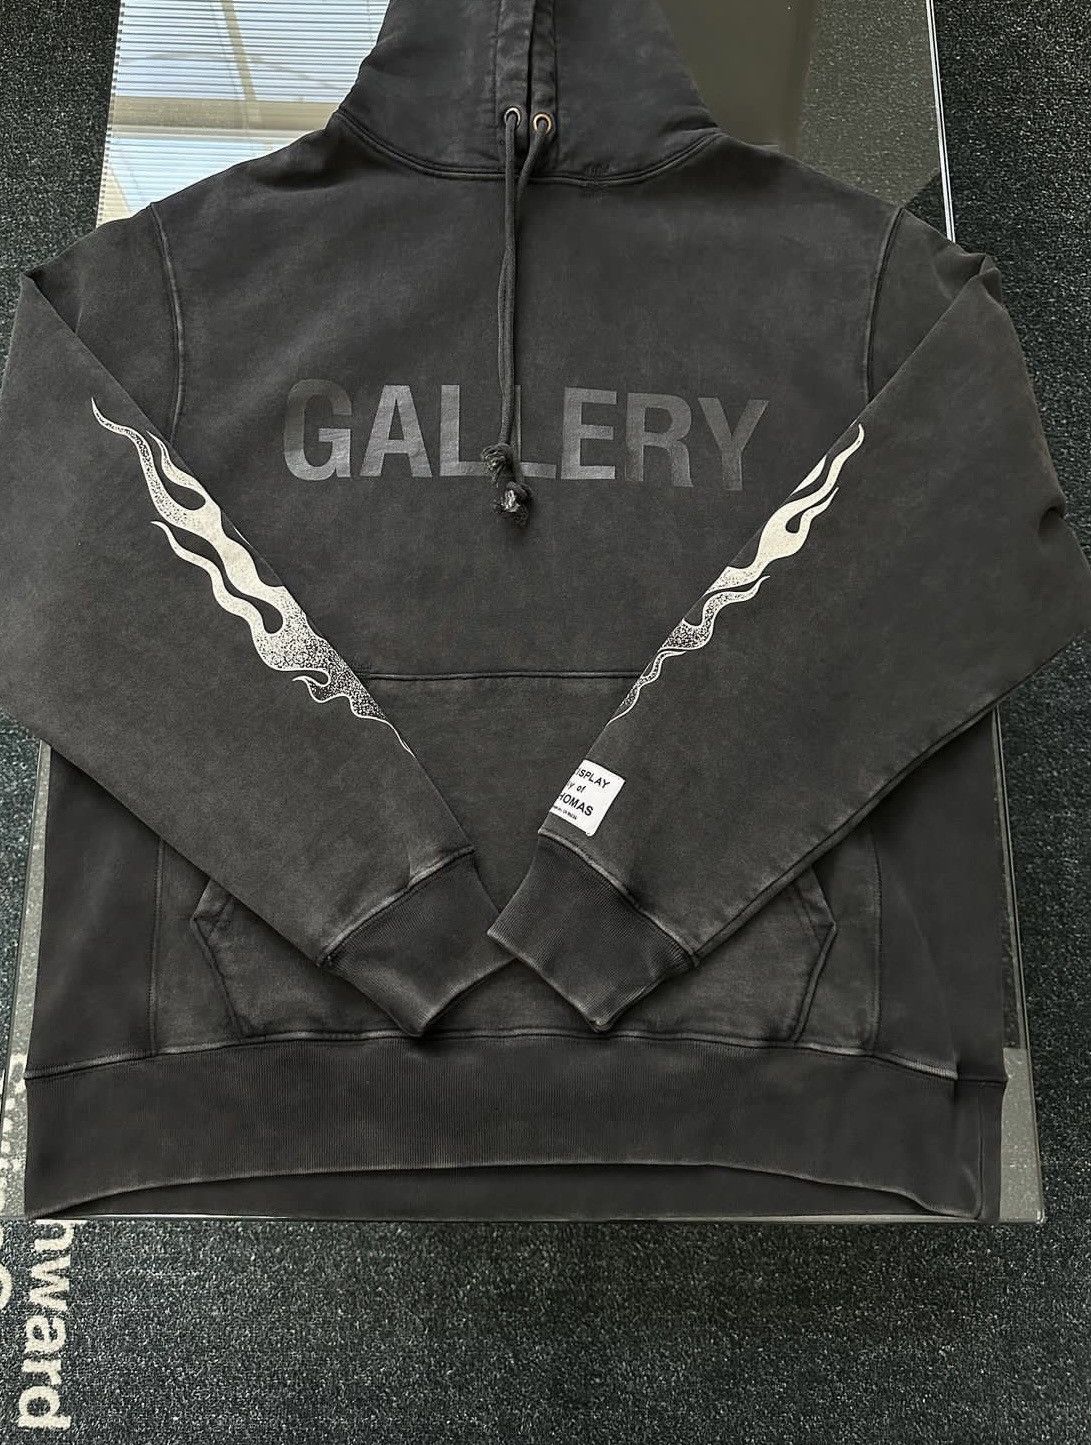 Most Expensive Items Sold on Grailed This Week: January 19, 2019